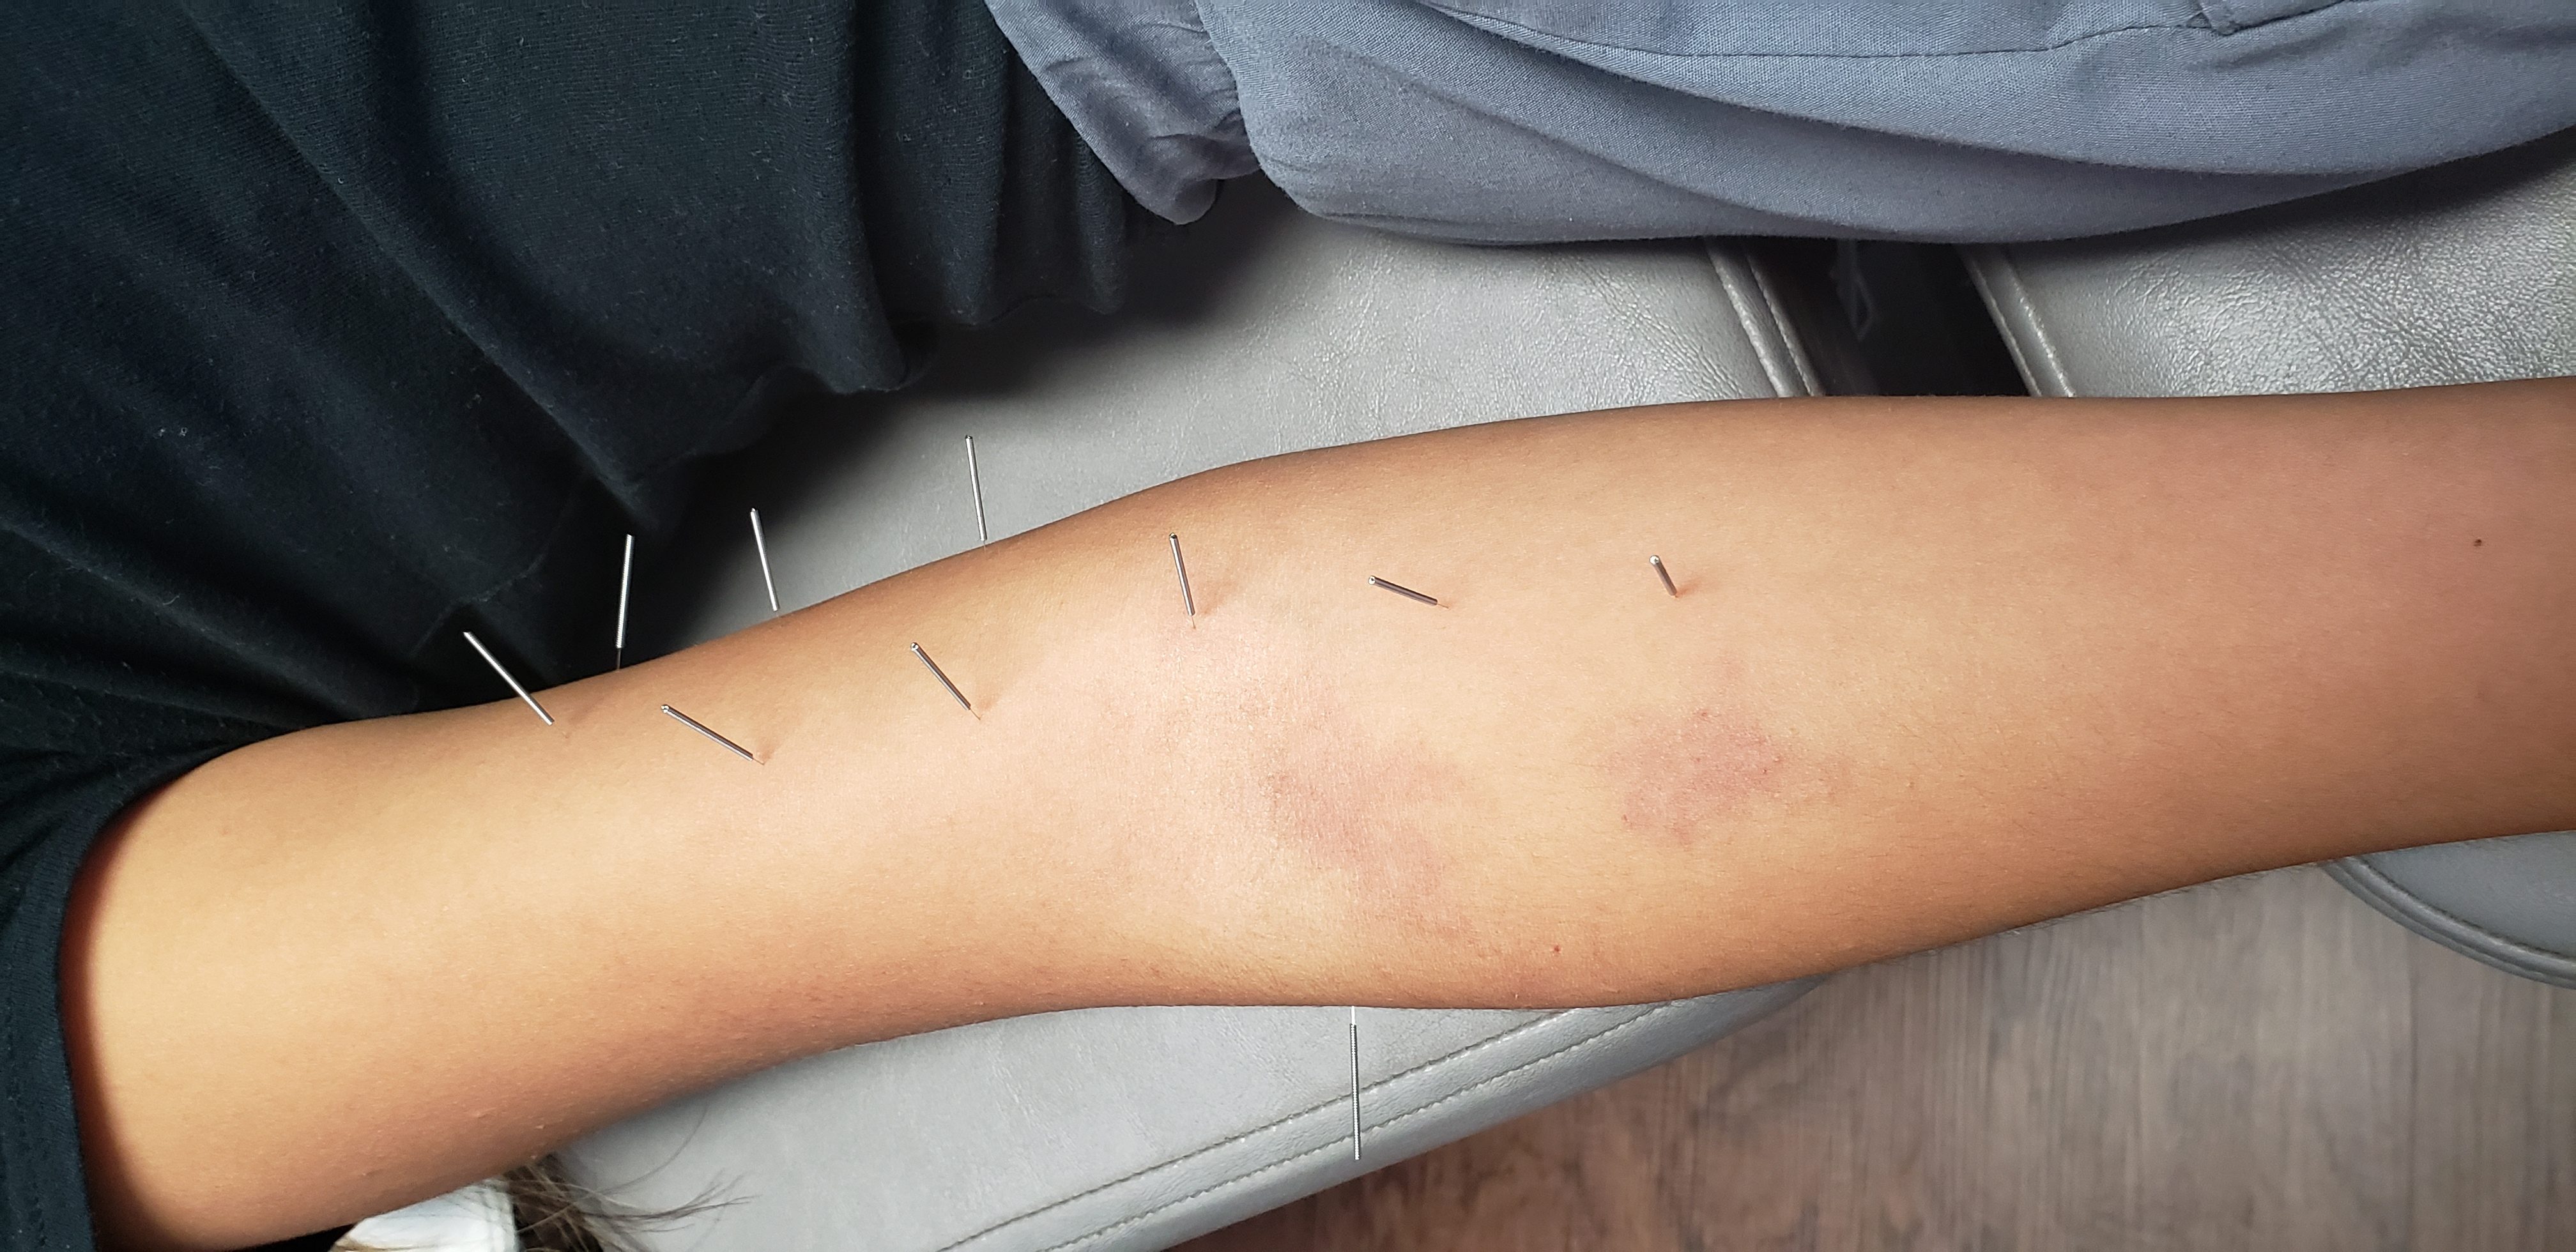 dry needling and arm pain at synergy chiropractic of houston